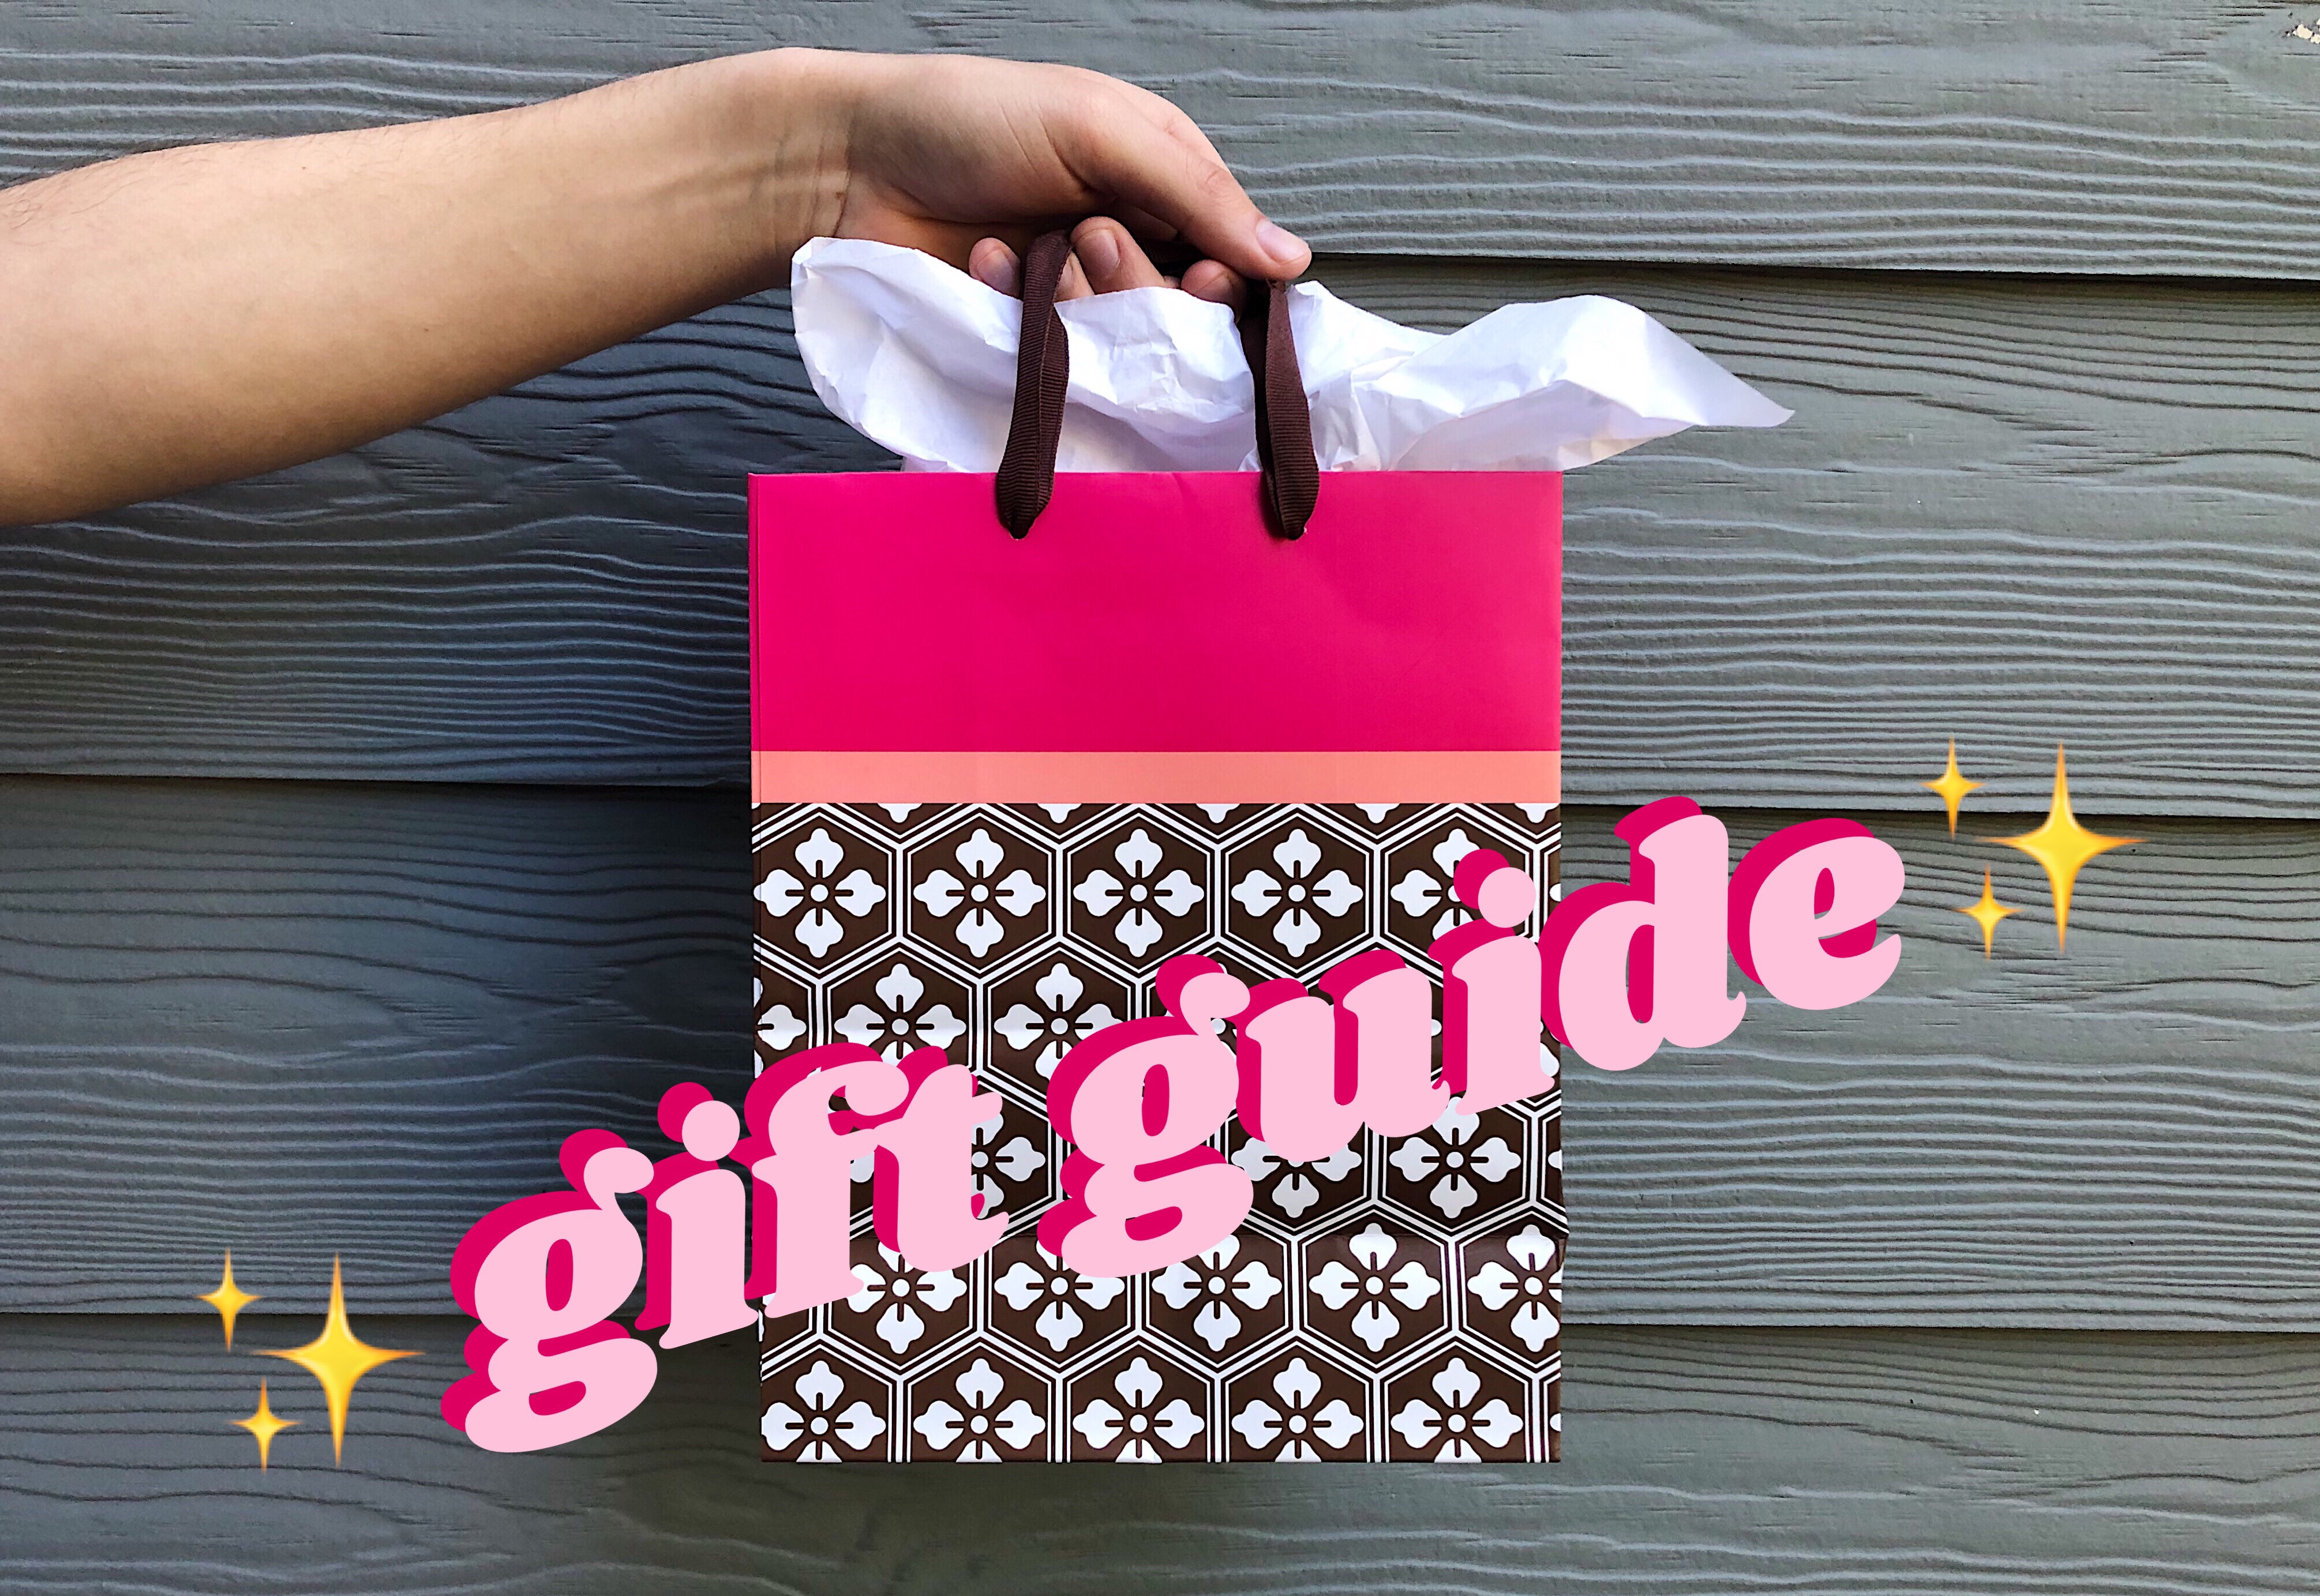 The image features a hand holding a gift bag in front of a grayish/blue wall. The upper part of the gift bag has a pink trim with a thinner peach trim right below.